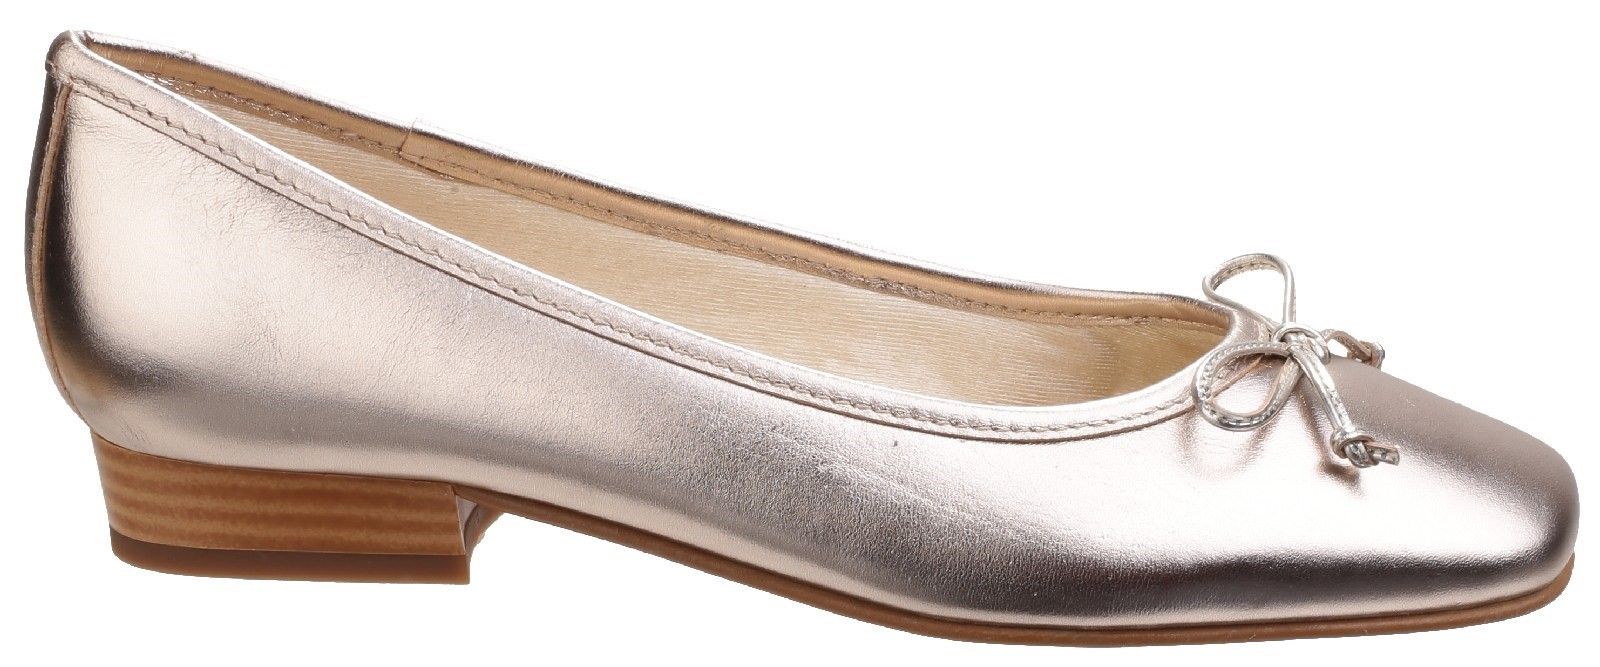 Riva Provence is an elegant ballerina with decorative bow detailing and square toe shape. Ideal wear for all occasions as can be easily dressed up or down. Provence is an elegant slip-on court shoe from 'Riva'. 
Crafted with a smooth leather upper finished with a simple bow and toggle feature. 
Sits on a low block heel.